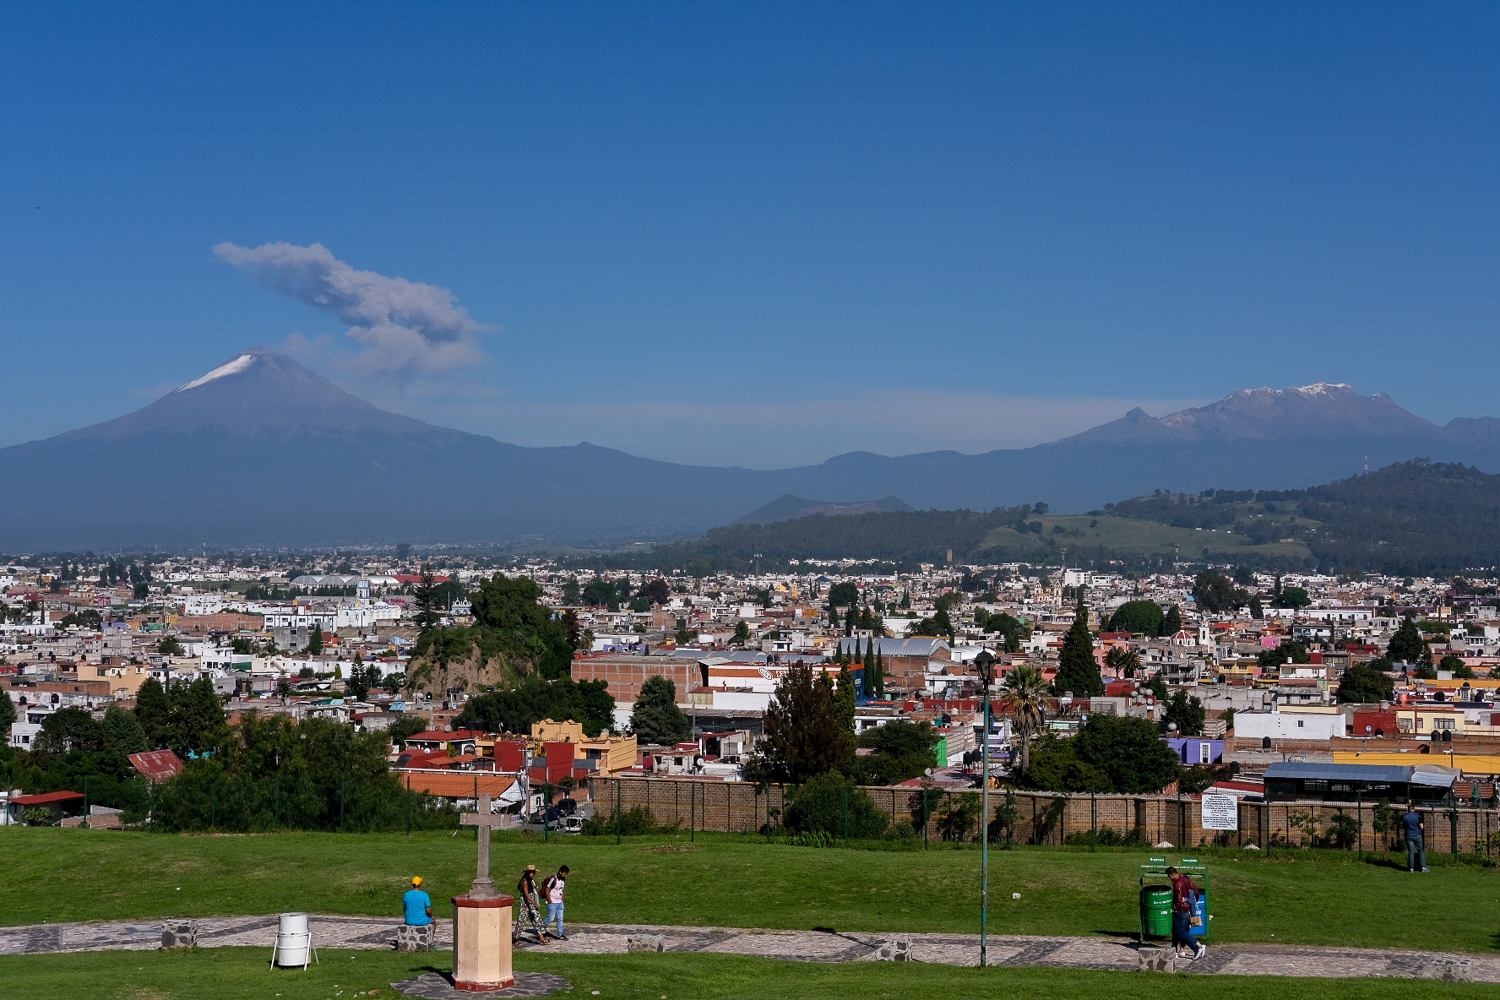  This was the view our team enjoyed in Cholula, the oldest inhabited city in Mexico. The smoking peak on the left is Popocatéptl and the group of snow-capped peaks on the right is Izztacíhuatl. These volcanoes are two of the tallest in the hemisphere